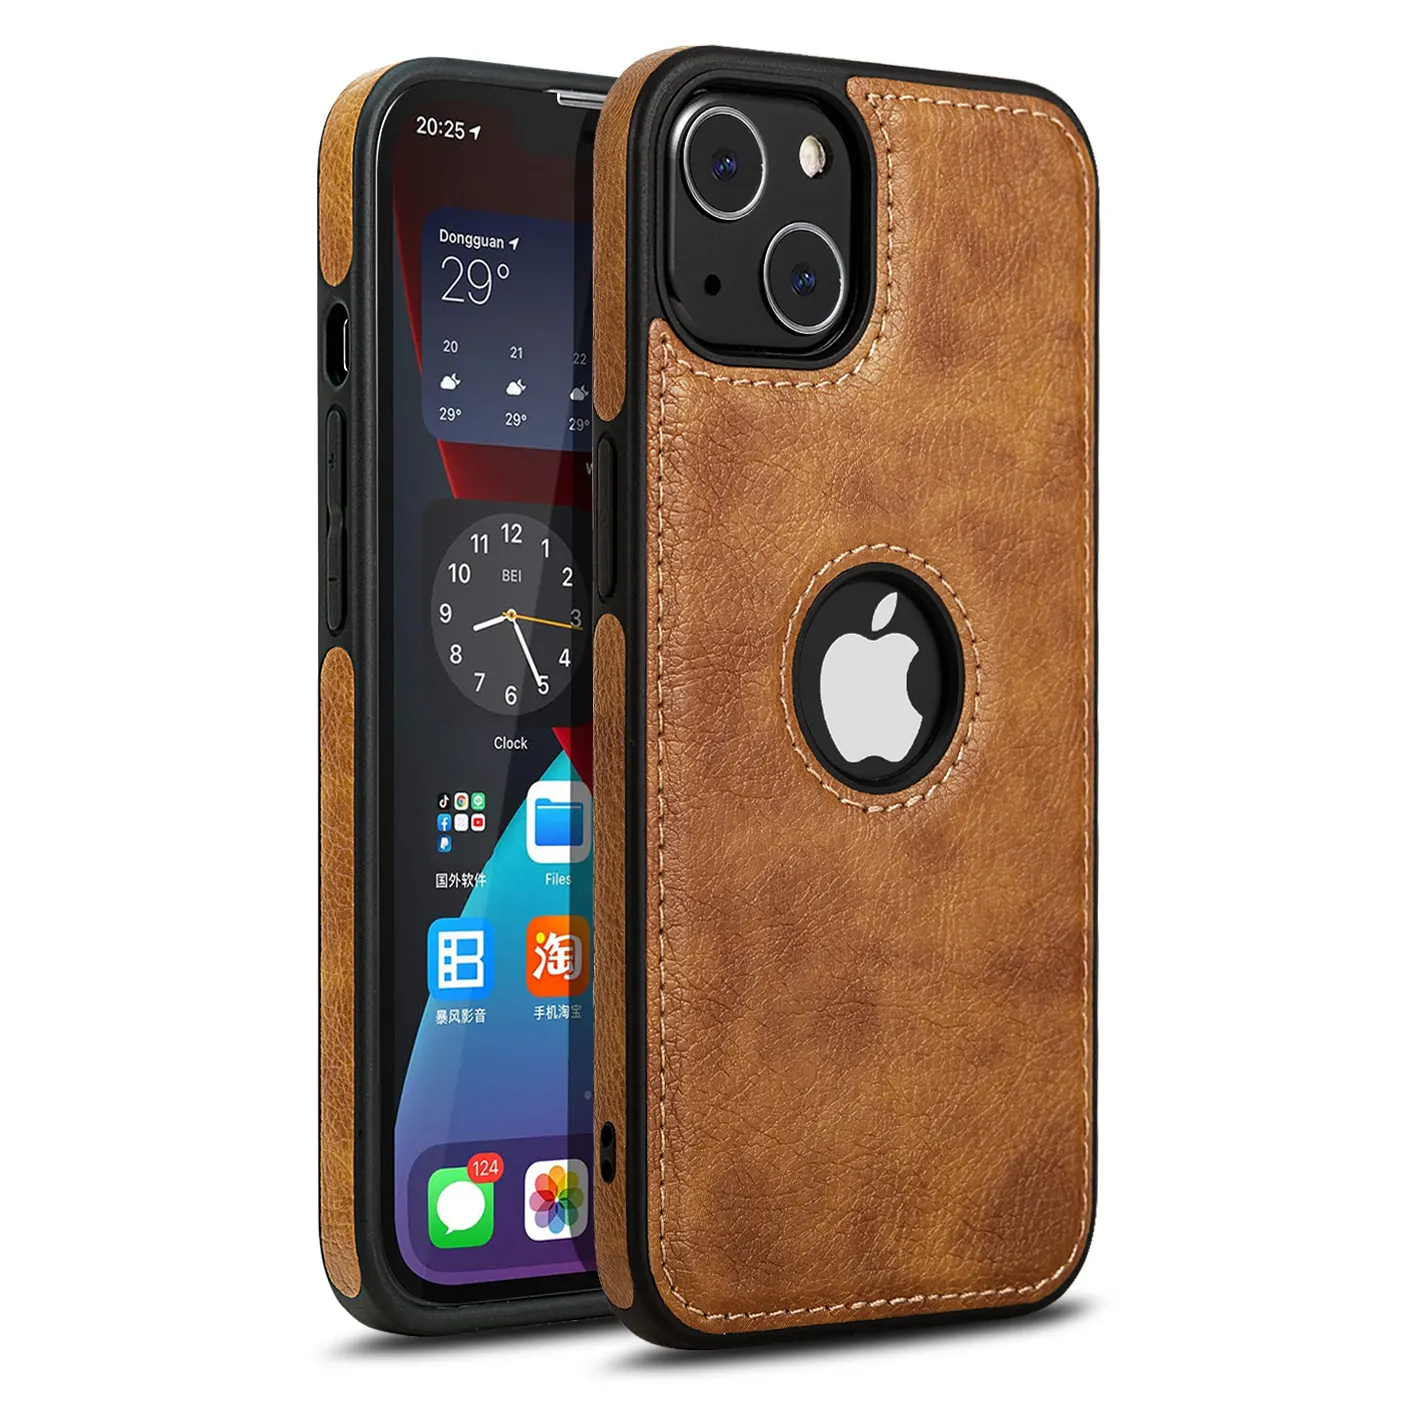 Top Selling Premium PU Leather TPU Back Cover Case For Iphone 13 12 11 X Xs XR Pro Max 7 8 Plus Smart Phone Accessories